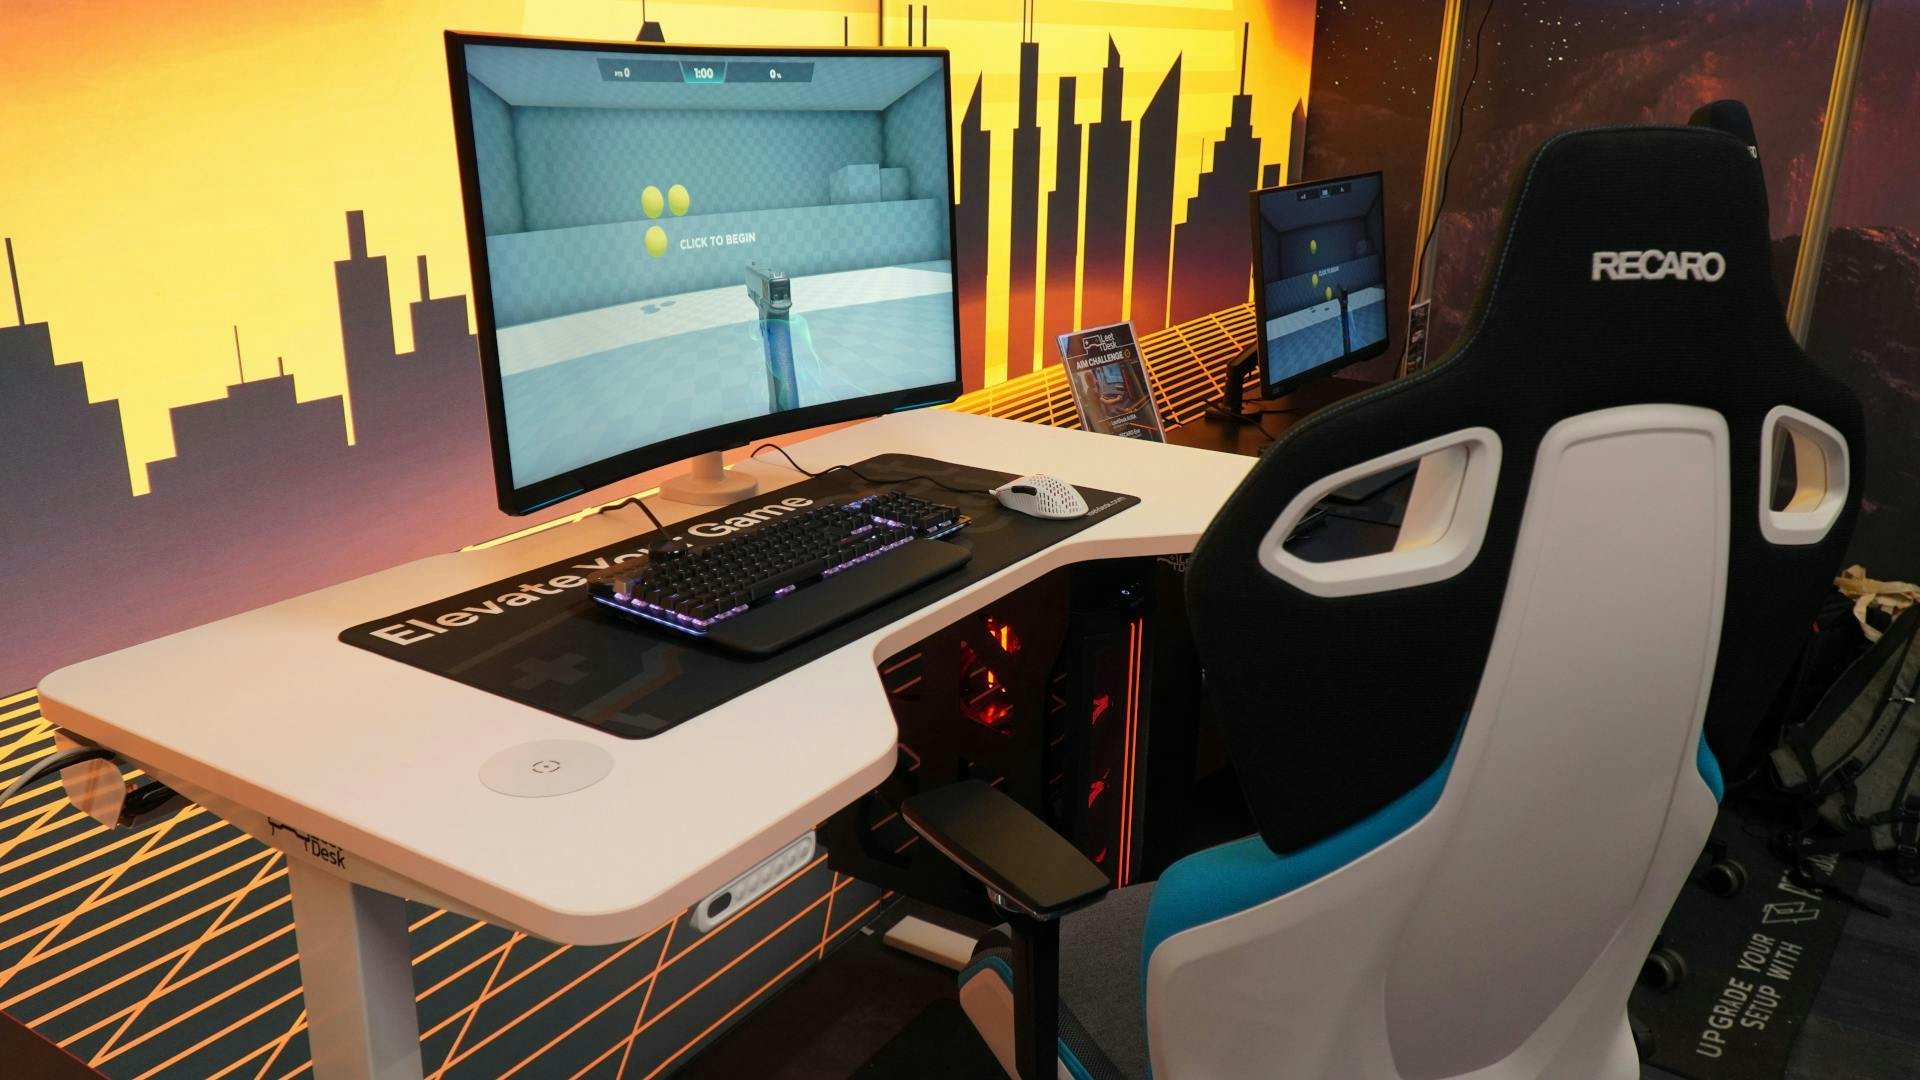 The LeetDesk Light white gaming desk with a matching white Recaro gaming chair